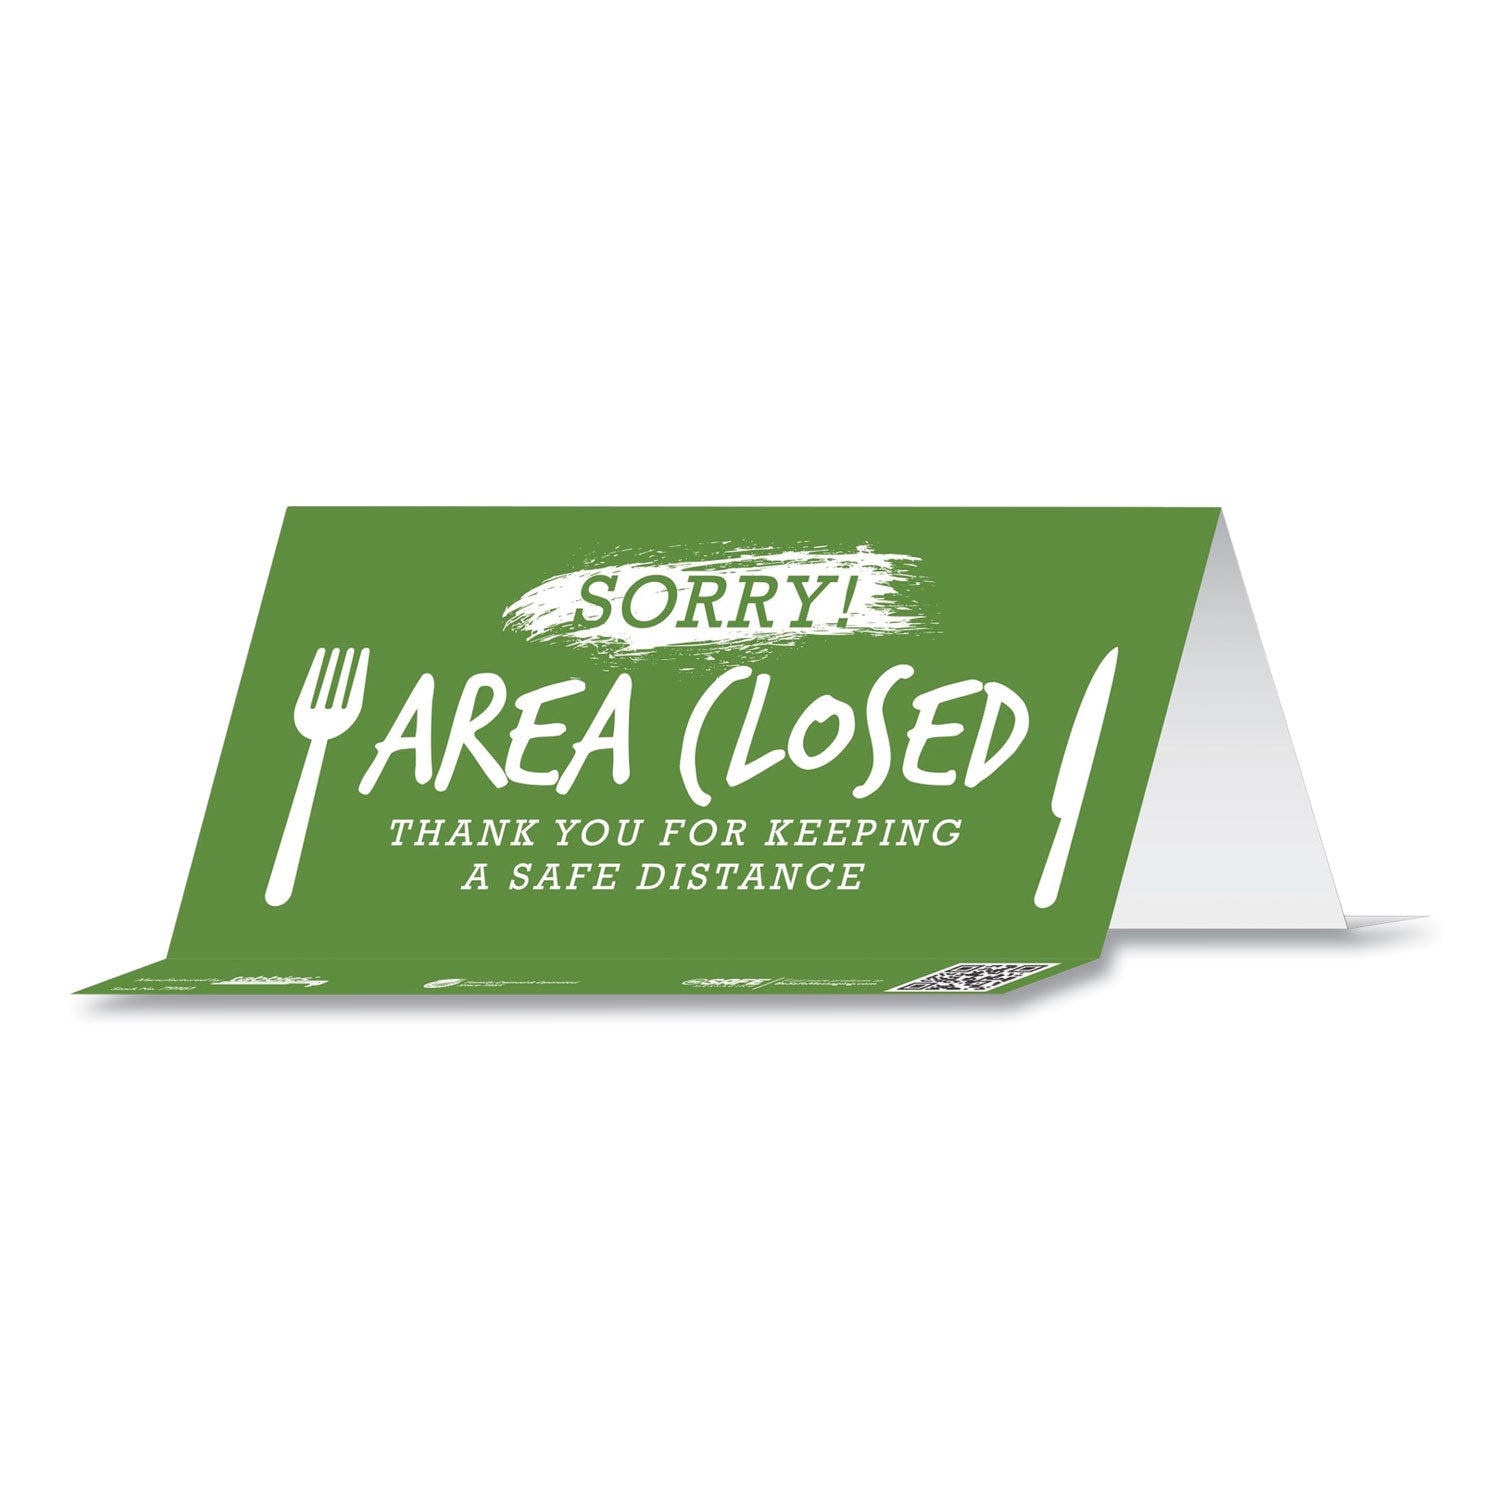 besafe-messaging-table-top-tent-card-8-x-387-sorry!-area-closed-thank-you-for-keeping-a-safe-distance-green-100-carton_tab79162 - 2